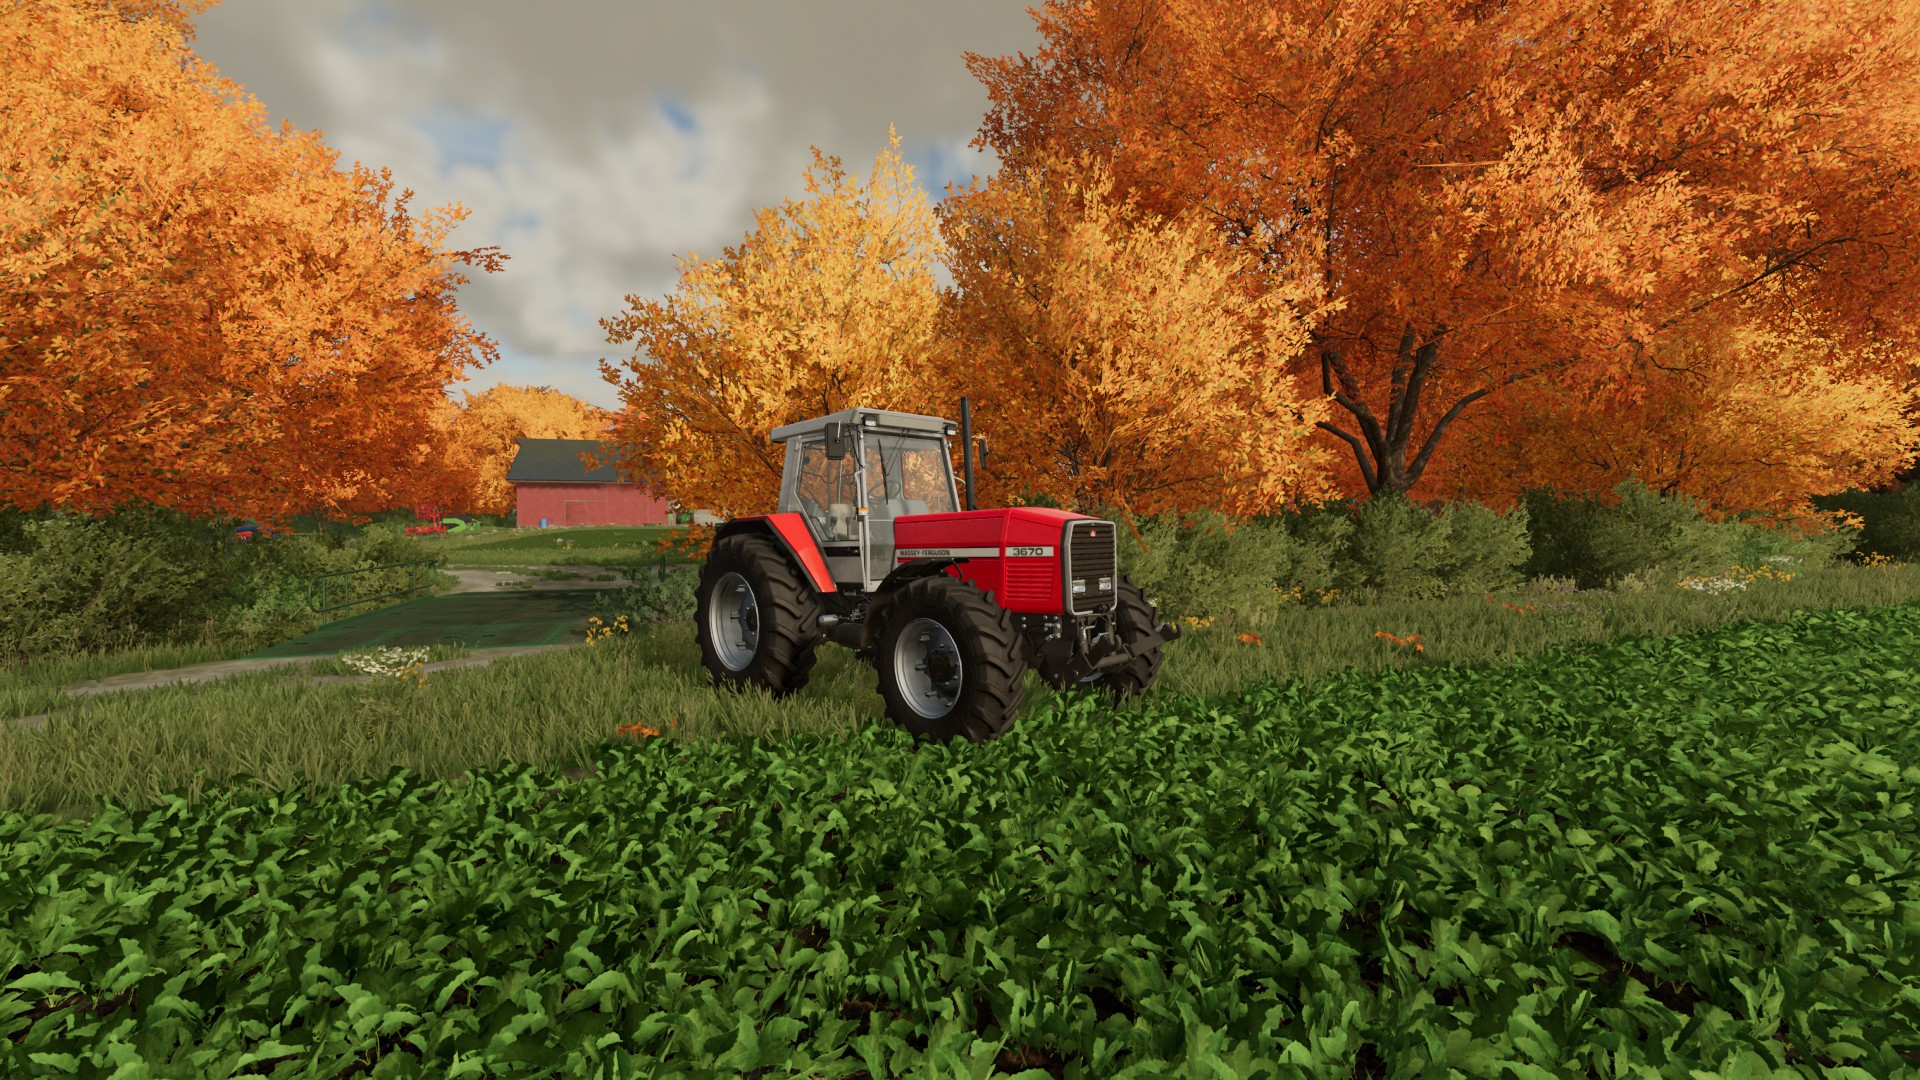 Farming Simulator 22: Year One Overview - Harvesting Good Times